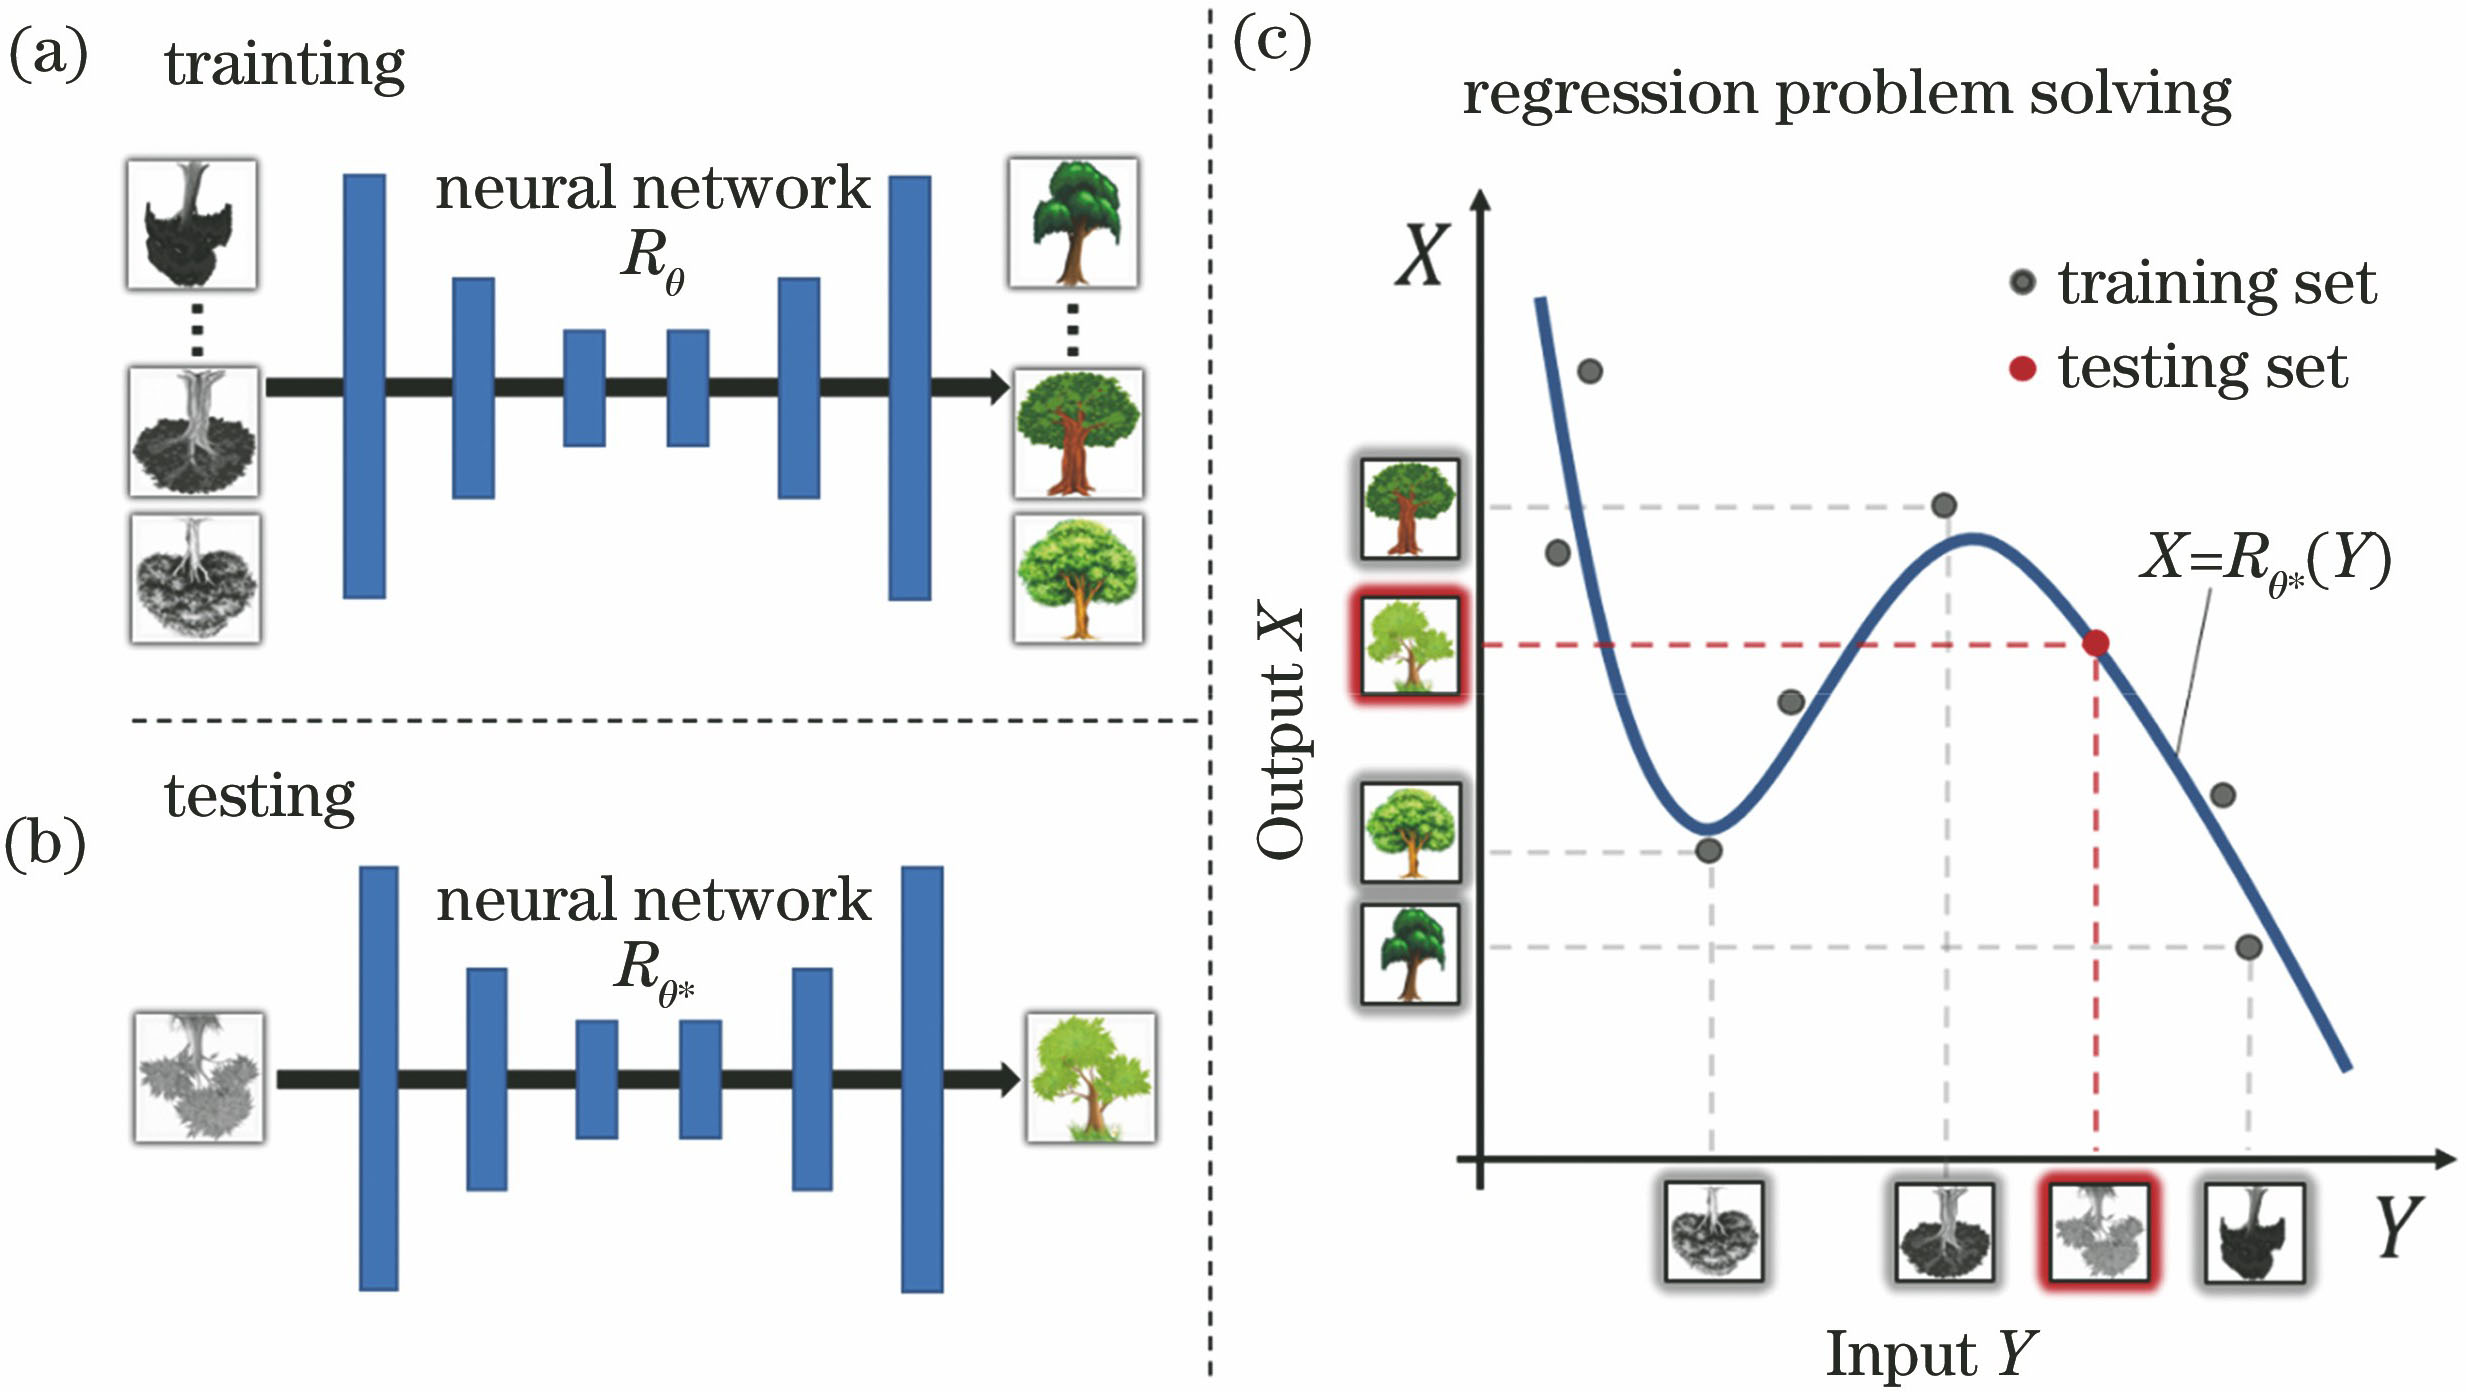 Schematic of regression problem solved using neural network. (a) Training; (b) testing; (c) fitting process